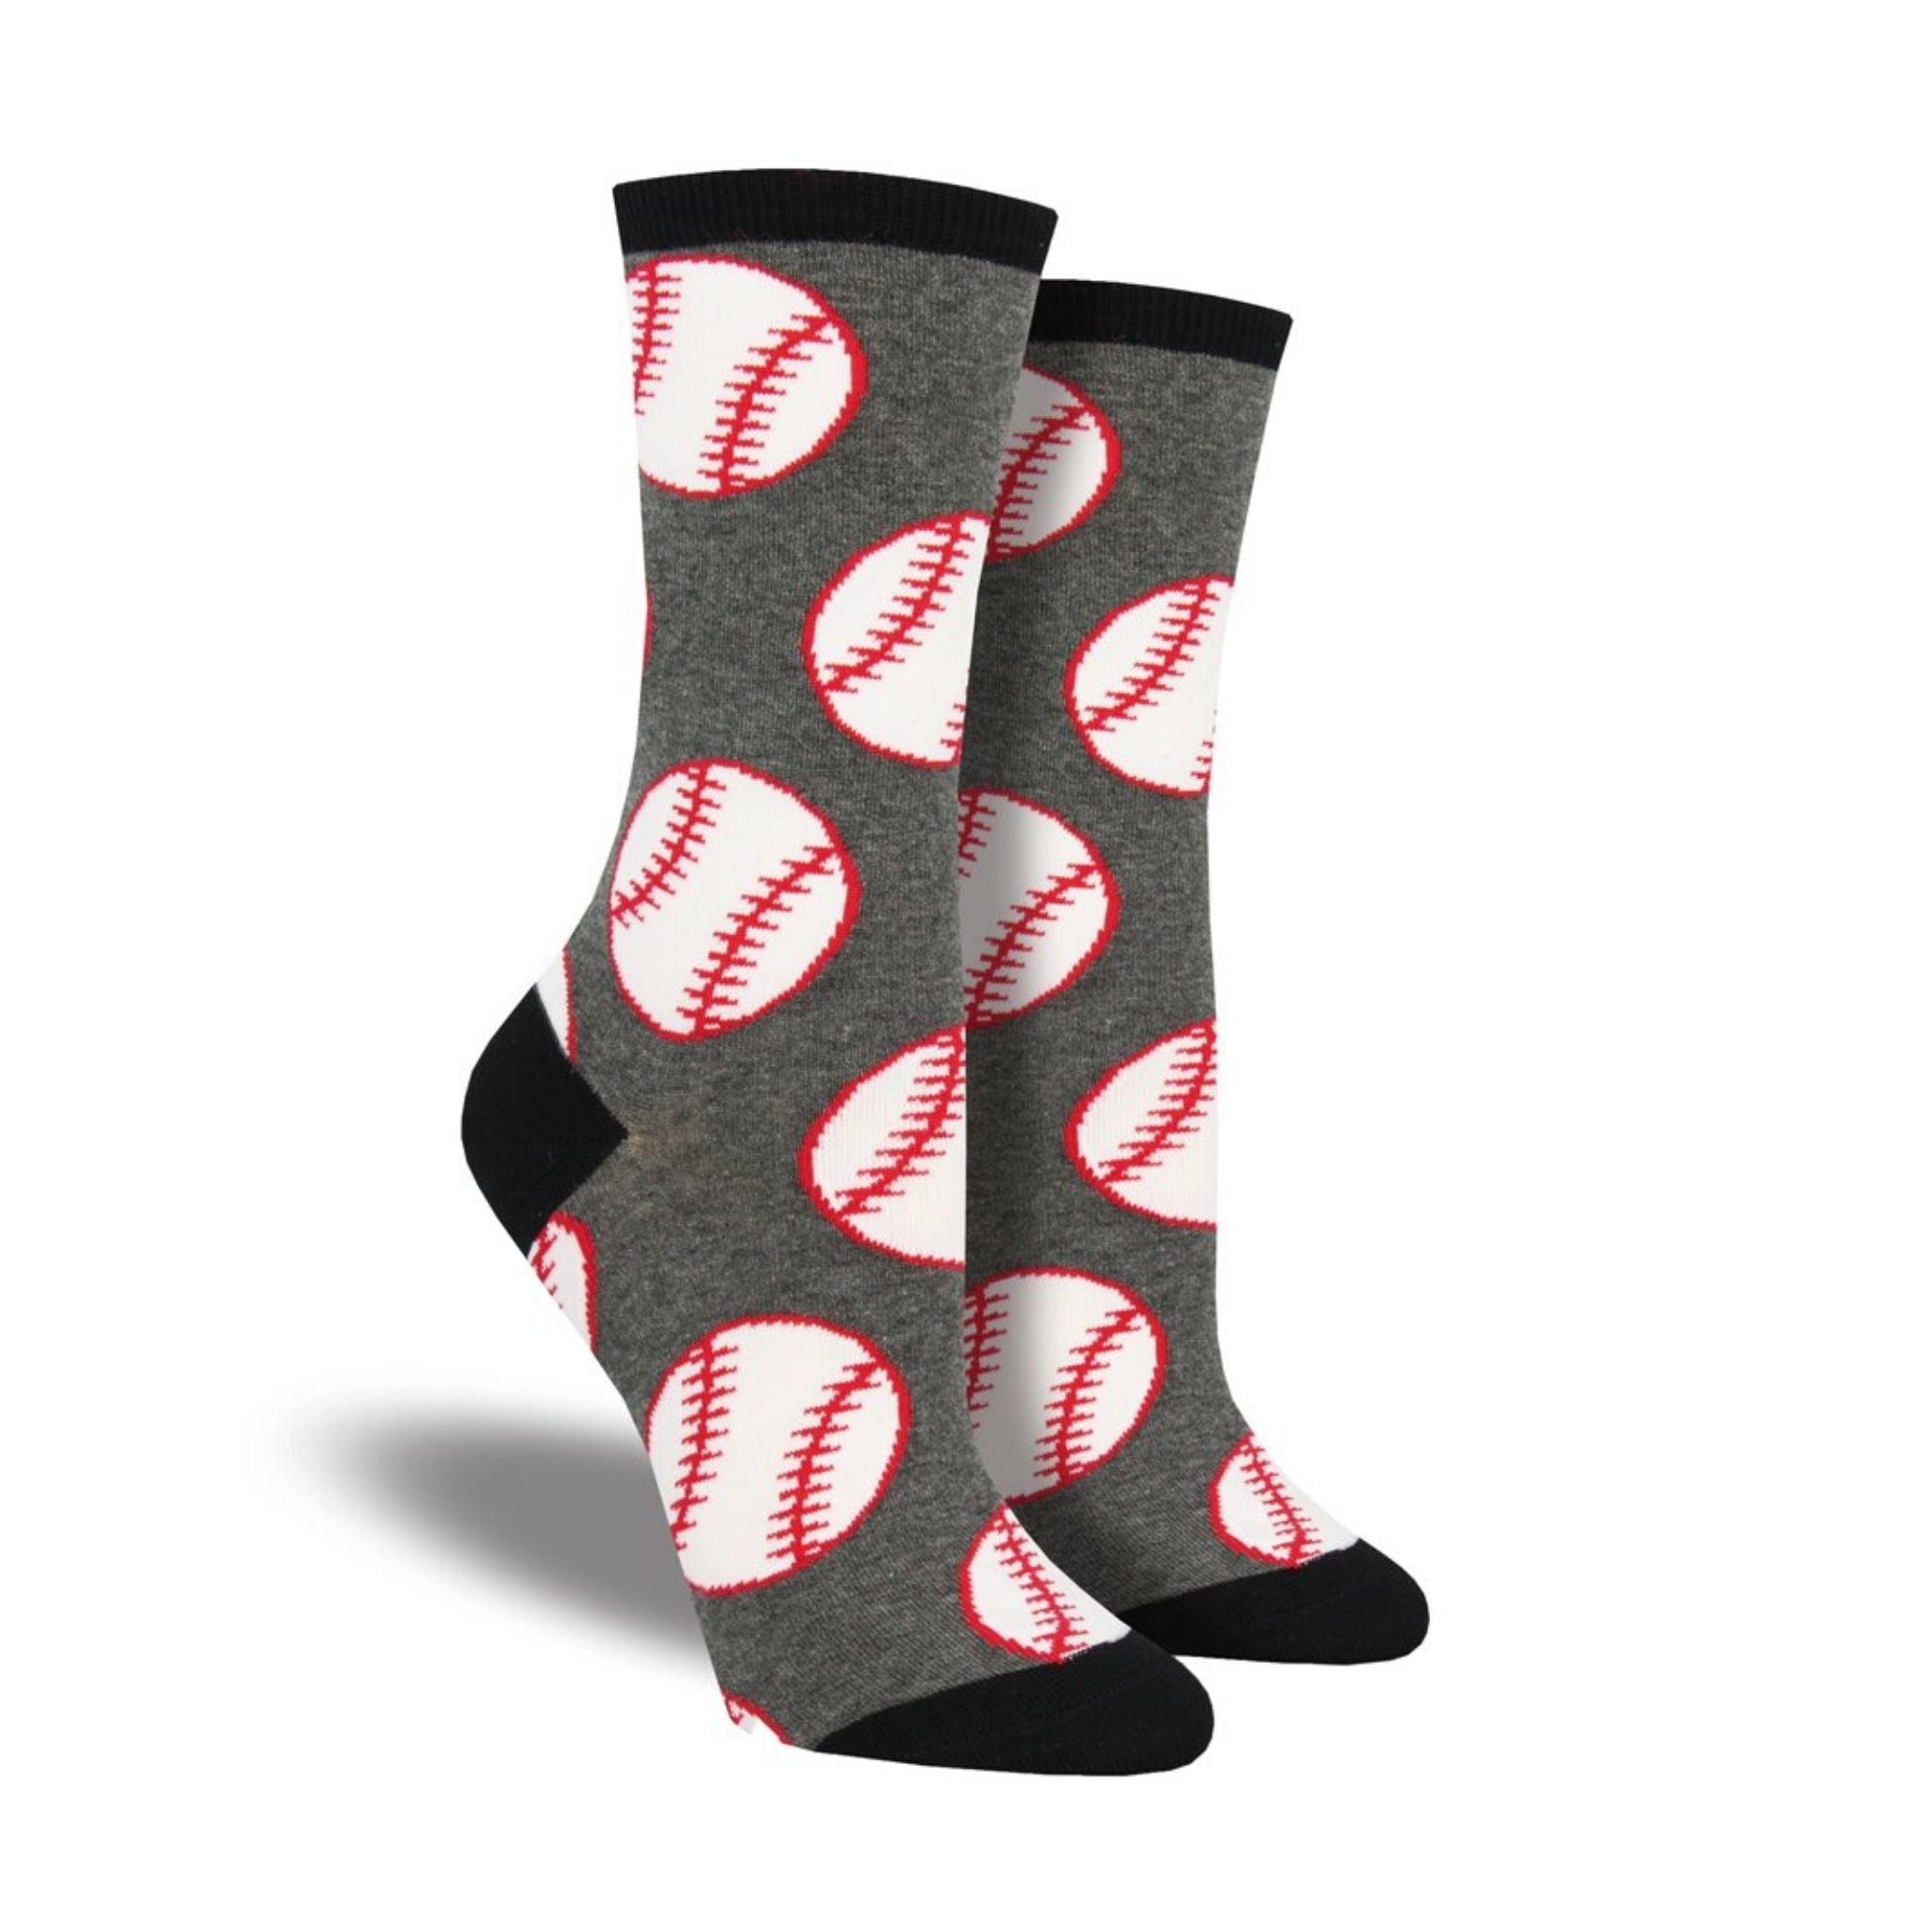 Grey Socks with black accents featuring baseballs